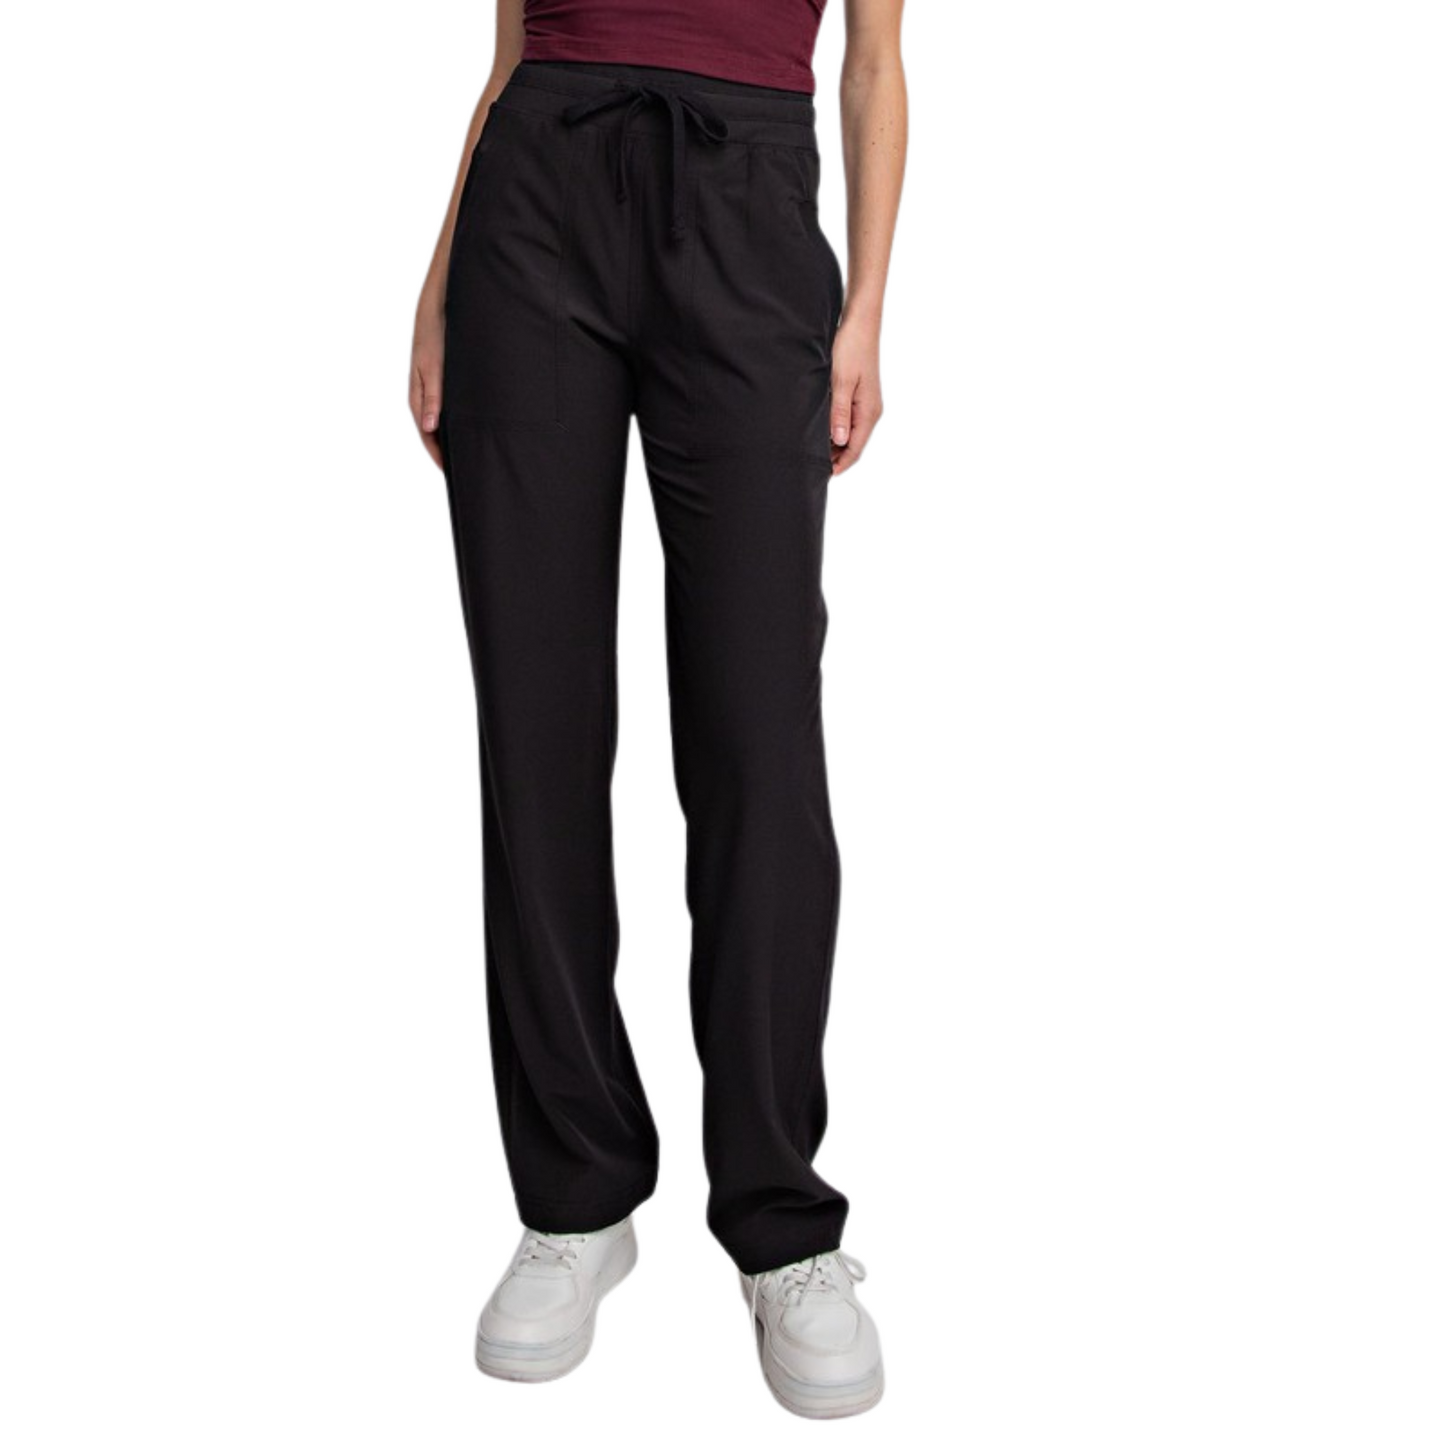 Crafted with oxford St Woven fabric, these Mid Rise Pants are perfect for any dance studio session. Designed for full length coverage, these black pants are both comfortable and stylish. Experience the durability and flexibility of the Oxford Mid Rise Pants.